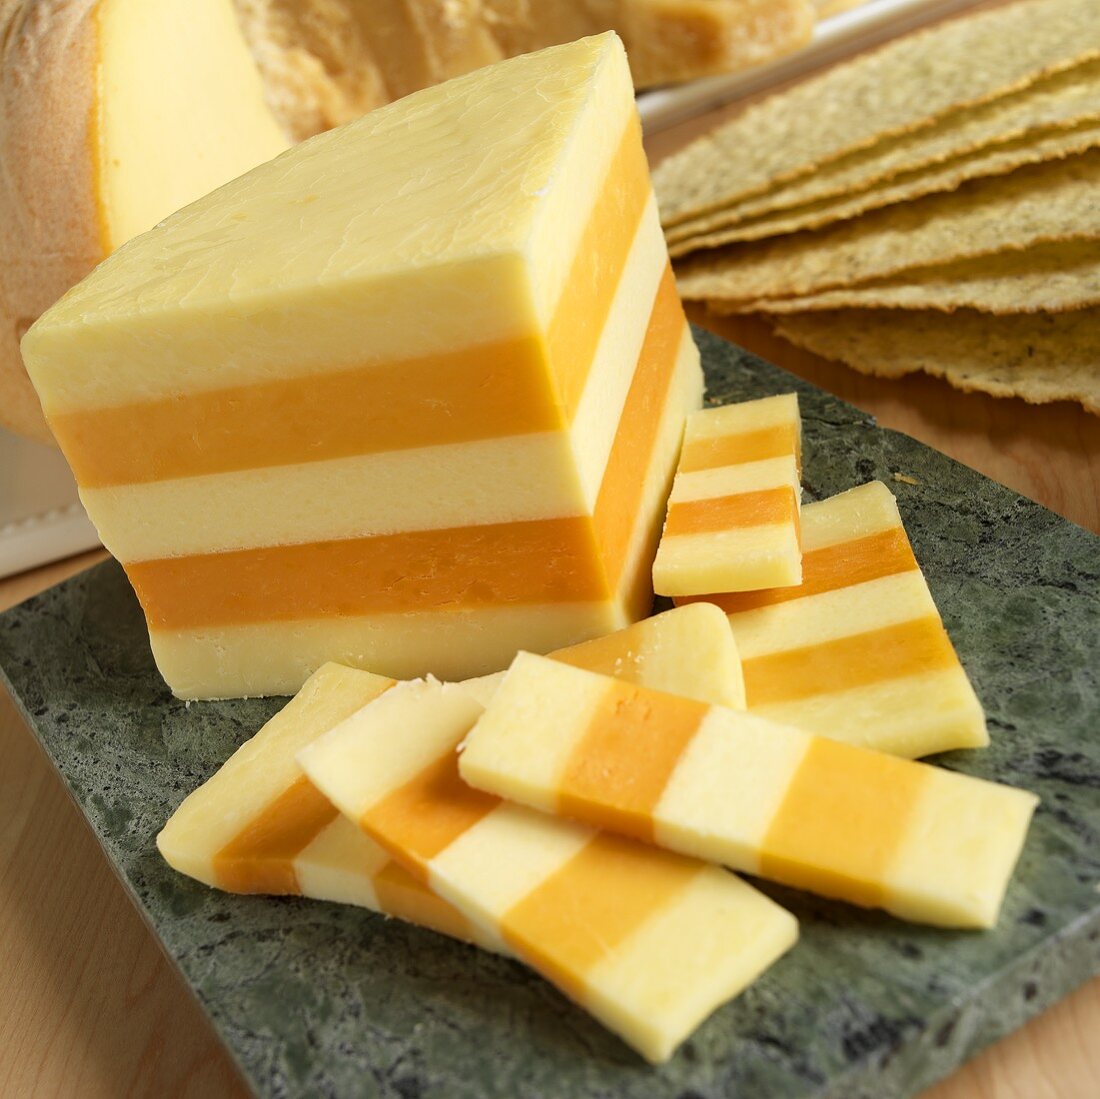 English Ilchester Cheese Partially Sliced on a Marble Board